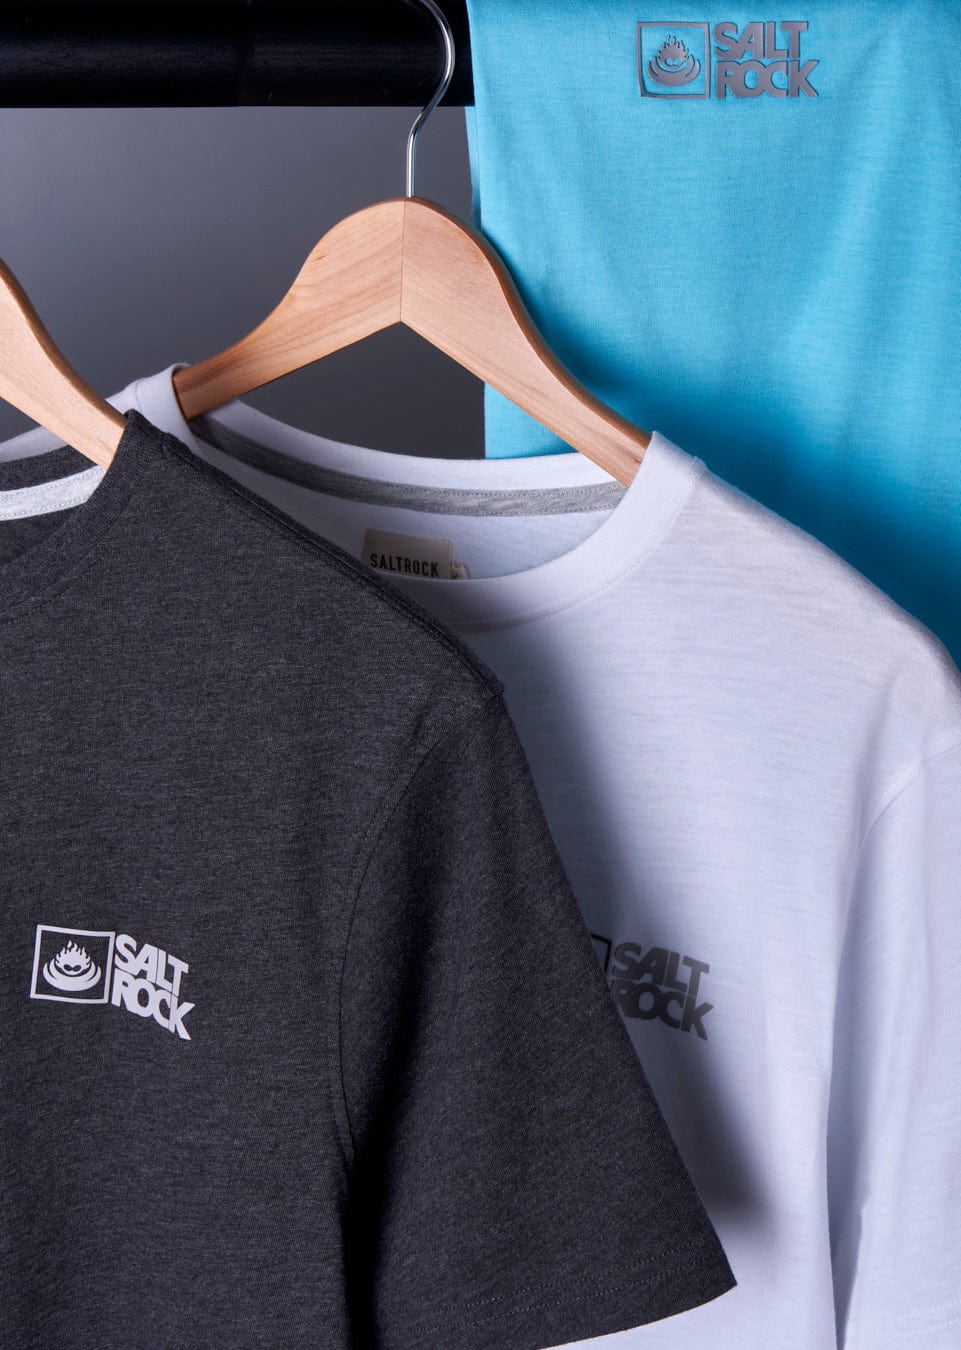 Three Saltrock Original - Mens Short Sleeve T-Shirts on hangers against a blue backdrop, featuring one black, one gray, and one blue shirt, each with the Saltrock branding.